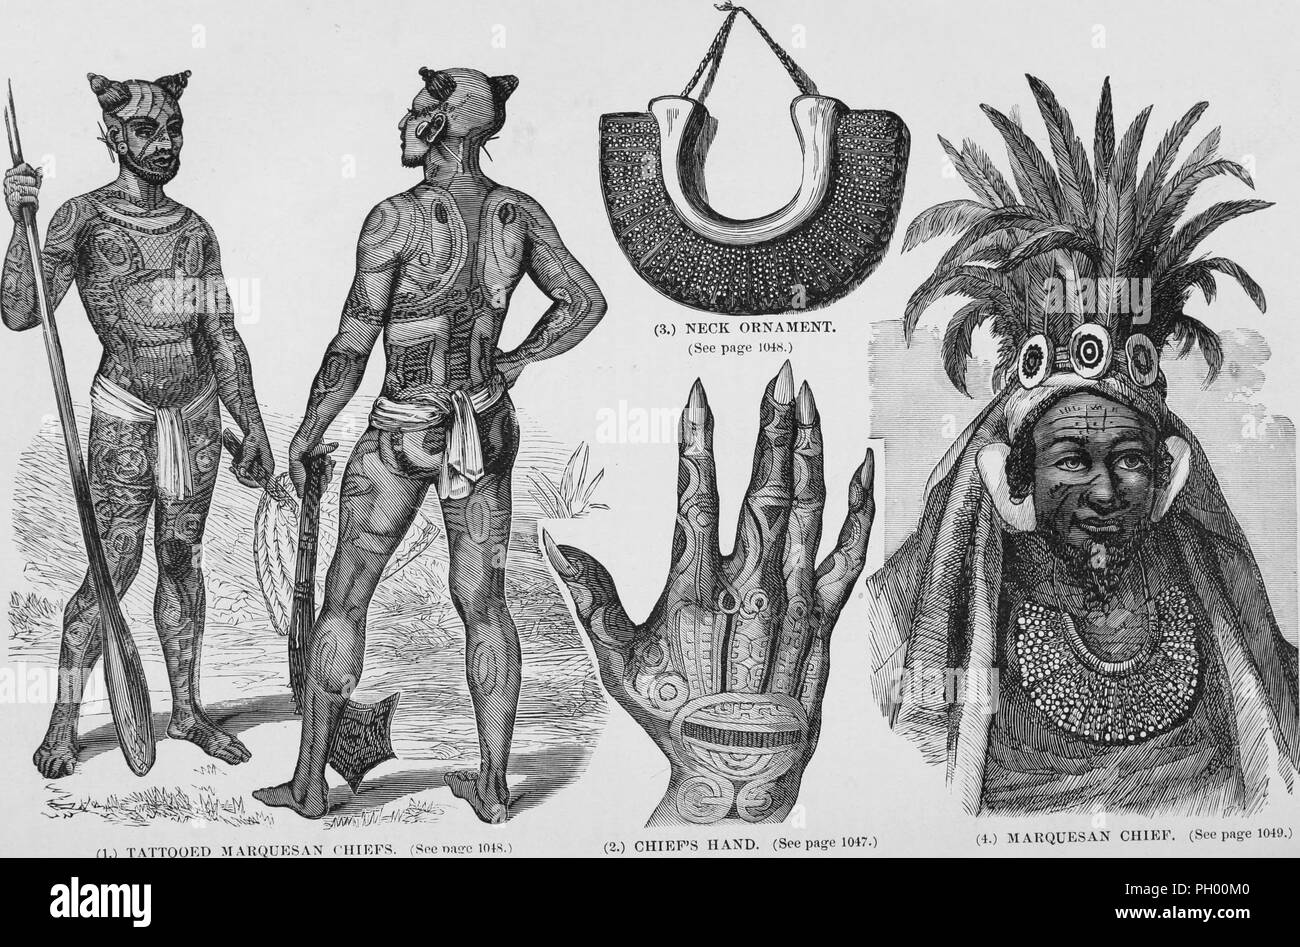 Black and white vintage print, depicting Marquesan tattoos and ornaments: including full-length, anterior and posterior portraits of 'Tattooed Marquesan Chiefs, ' showing their horn hairstyle and shell earrings; a close-up of a 'Chief's Hand' with tattoos and filed fingernails; a 'Neck Ornament' made from wood, wax, and seeds; and a close-up of the head of a 'Marquesan Chief' with facial tattoos, wearing a feather headdress, earrings, cloak and necklace, located in the Marquesas Islands in French Polynesia, published in John George Wood's volume 'The uncivilized races of men in all countries o Stock Photo